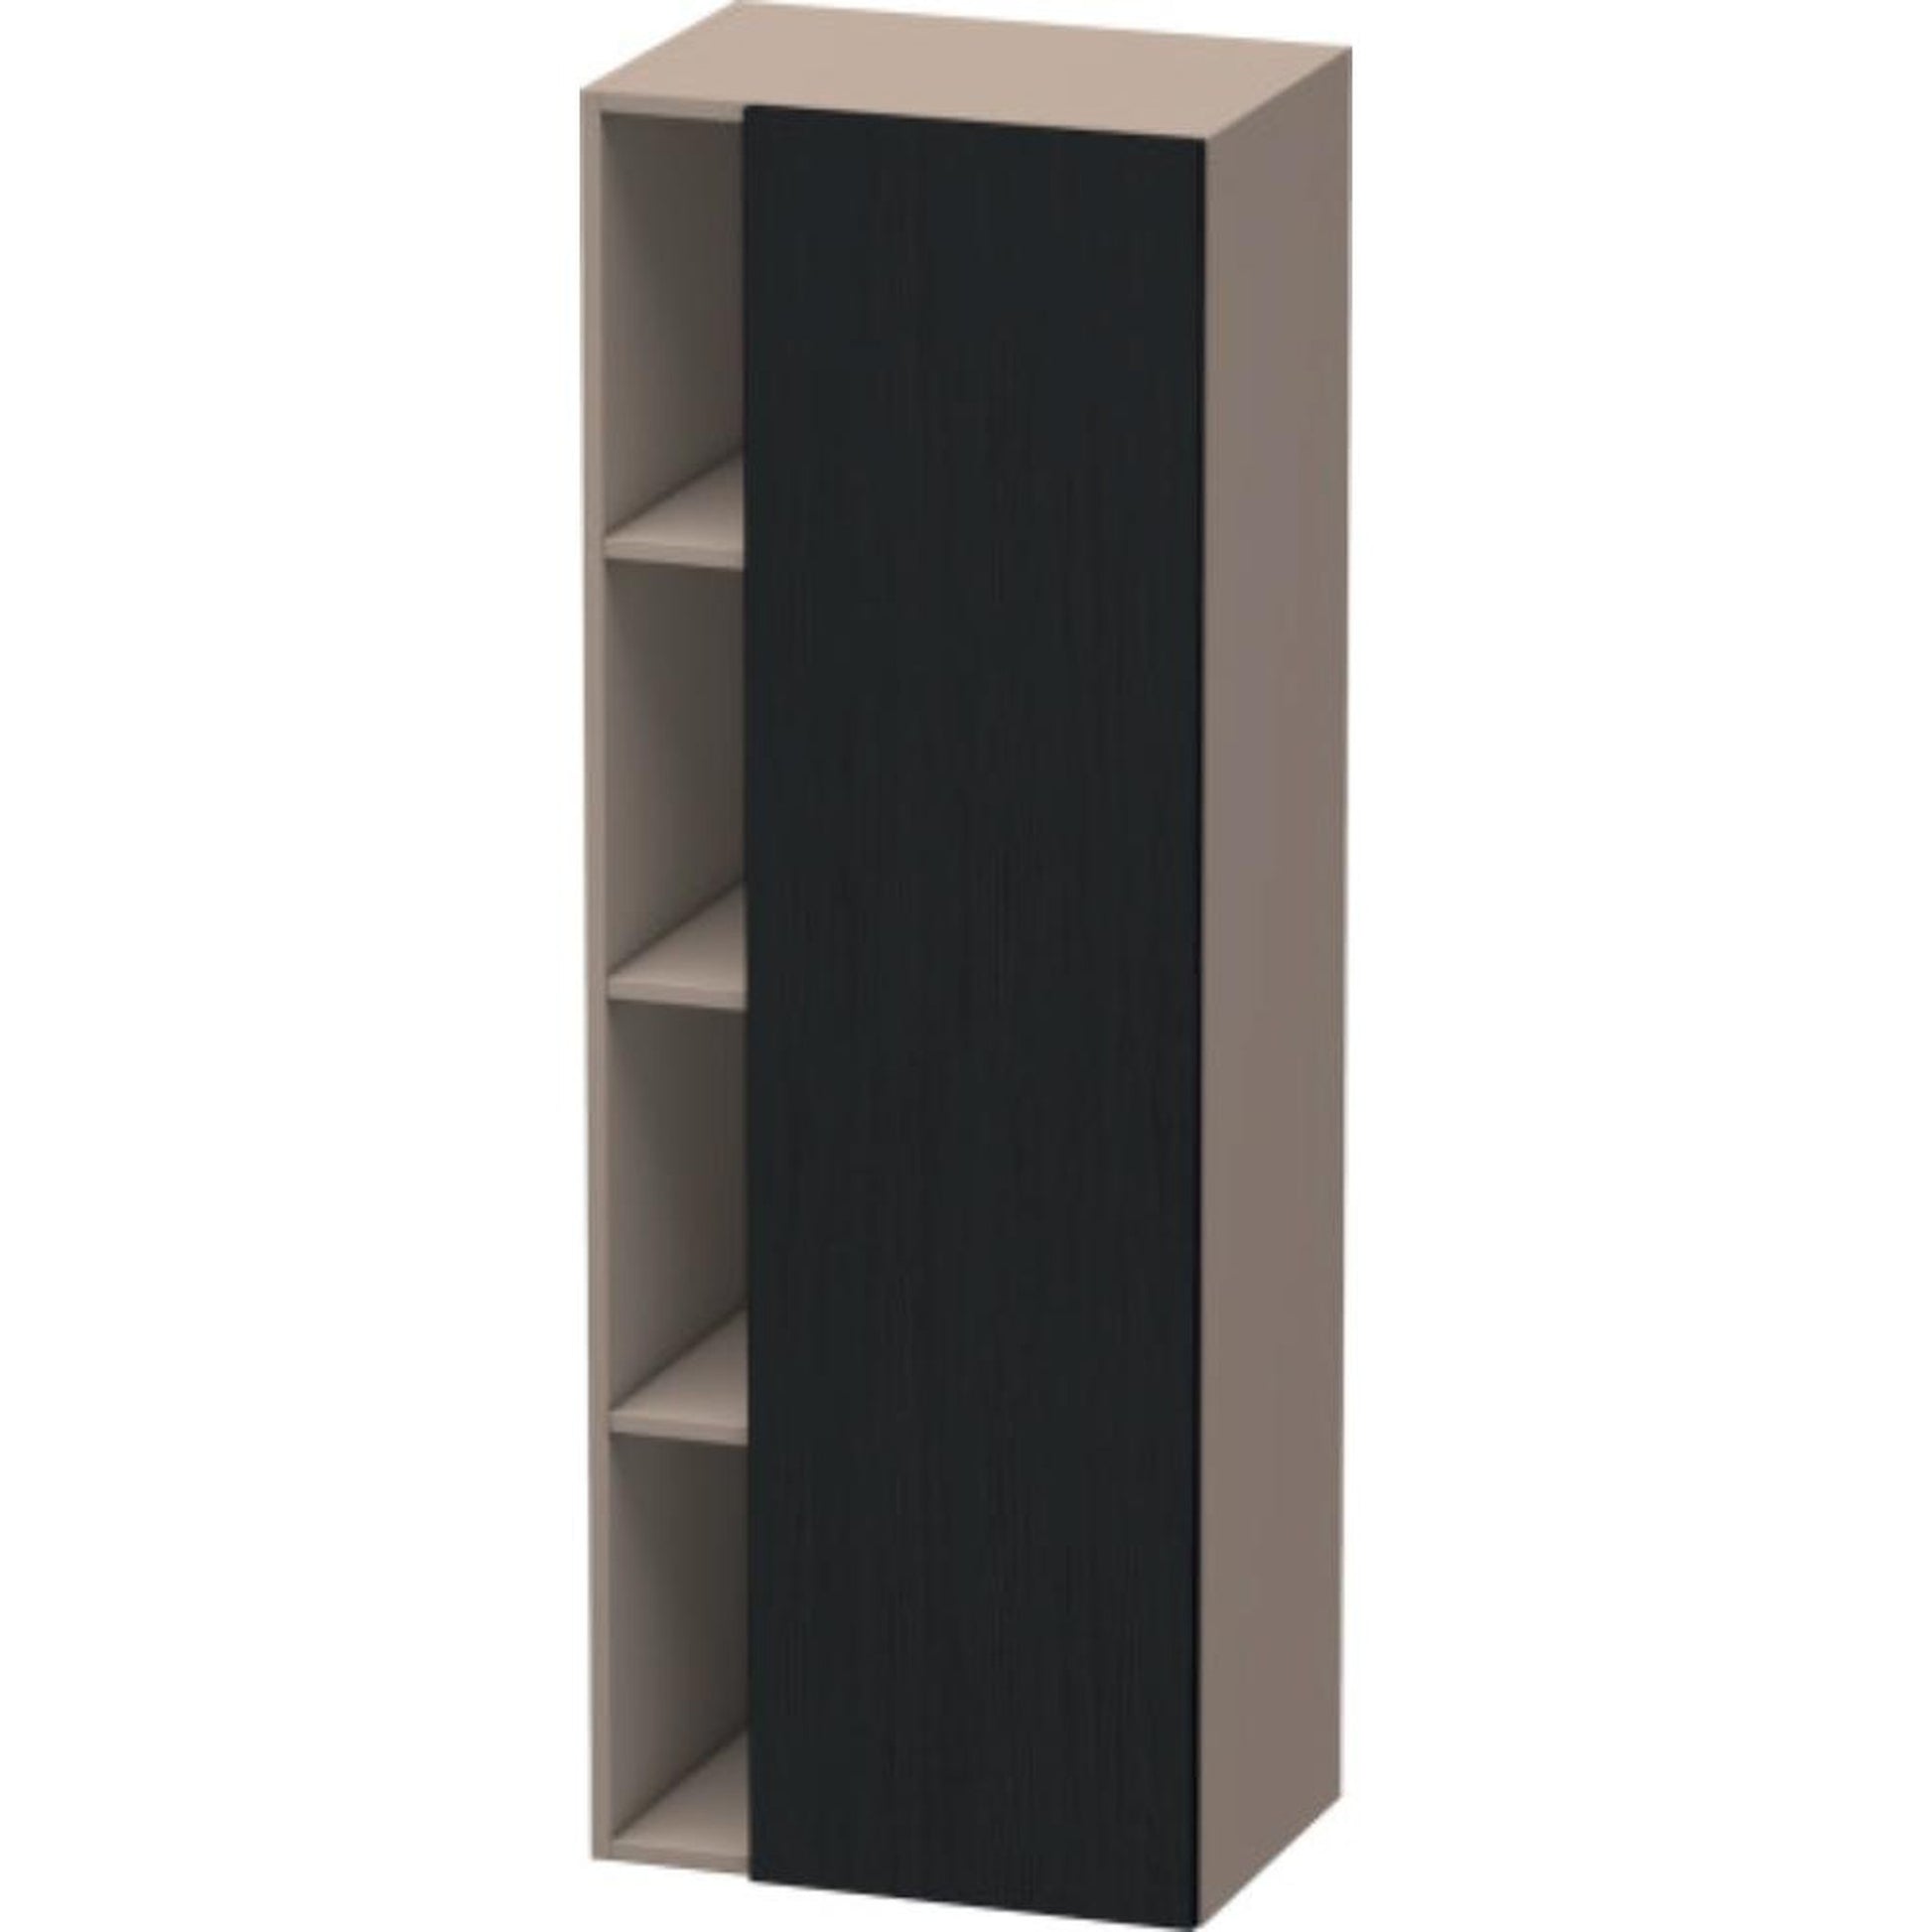 Duravit DuraStyle 20" x 55" x 14" Tall Cabinet With Right Hinge One Door in Oak Black and Basalt (DS1239R1643)